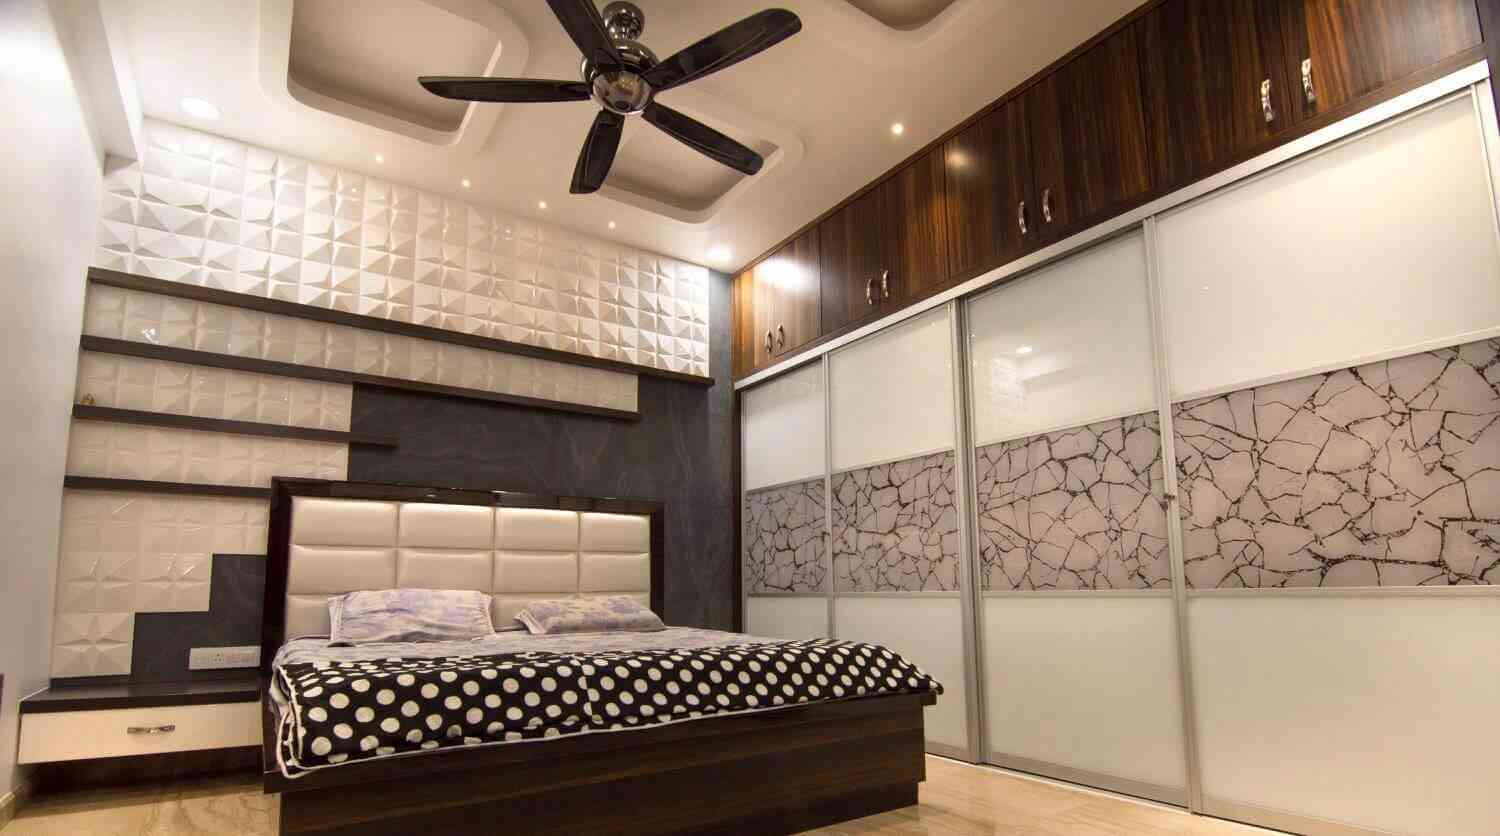 Contemporary Modern Bedroom Design With Floral Wallpaper